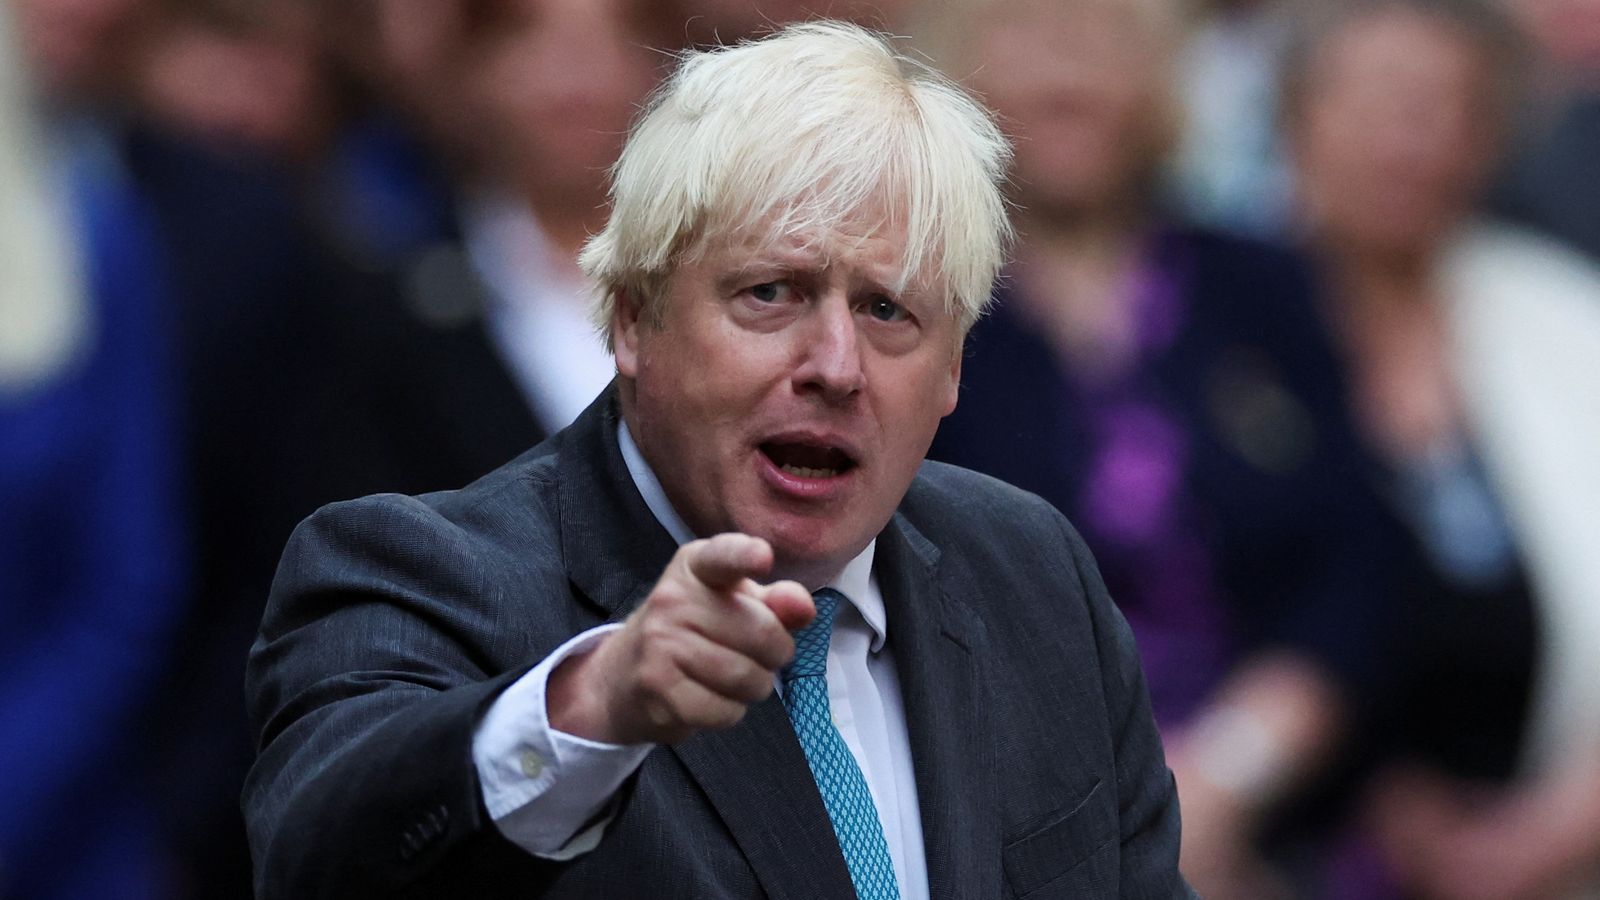 Johnson may be dominating talk about Tory leadership race but a win won't be easy